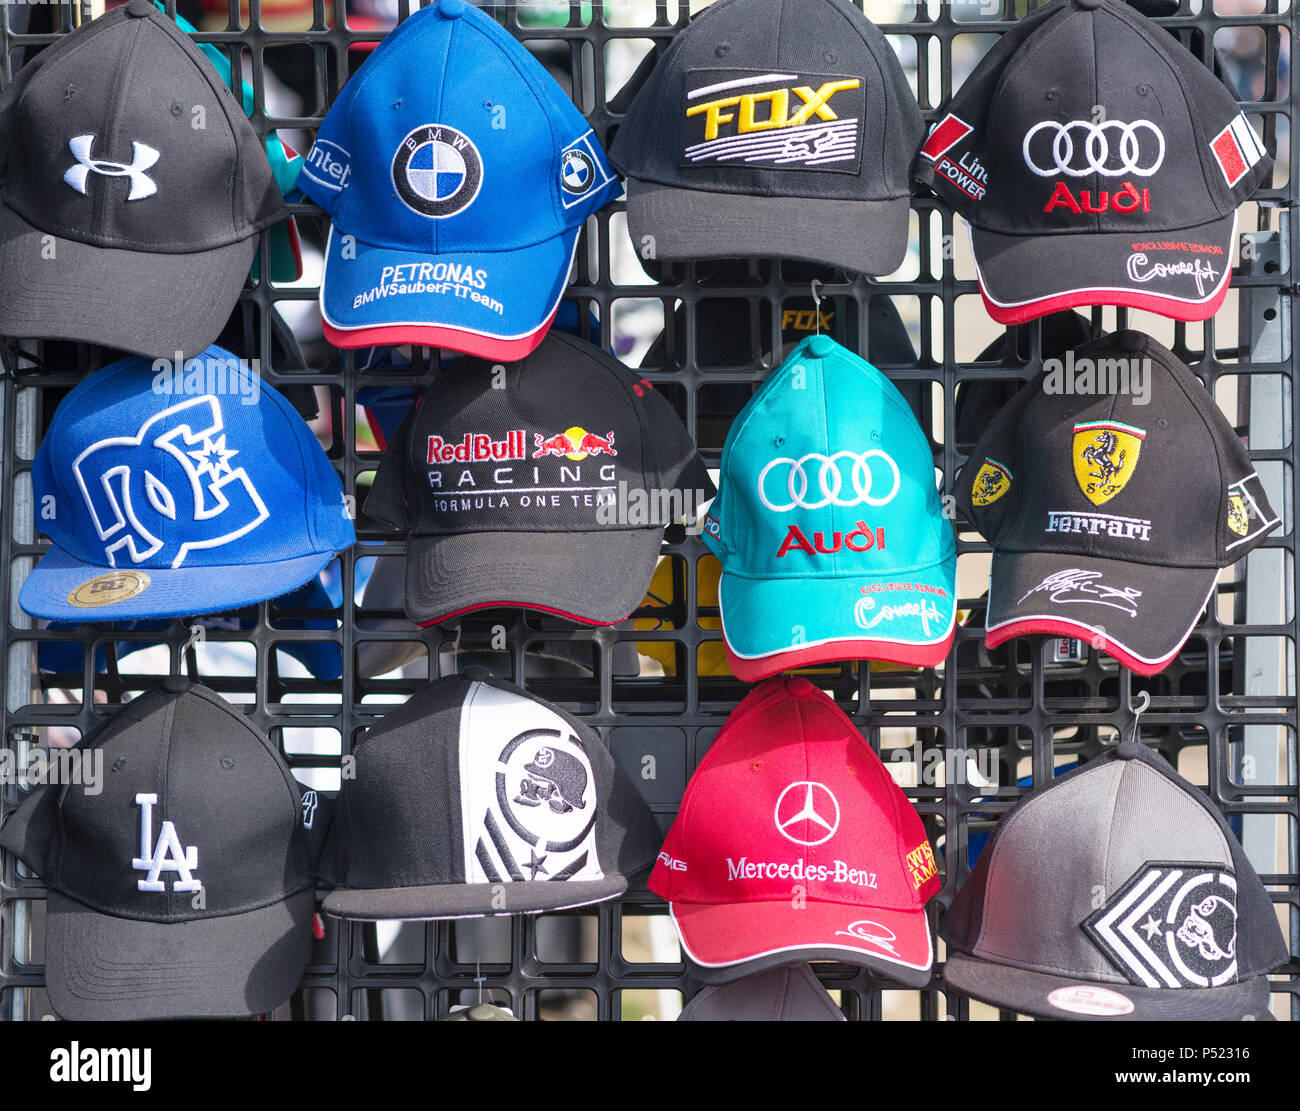 Motoring caps on a stand Stock Photo